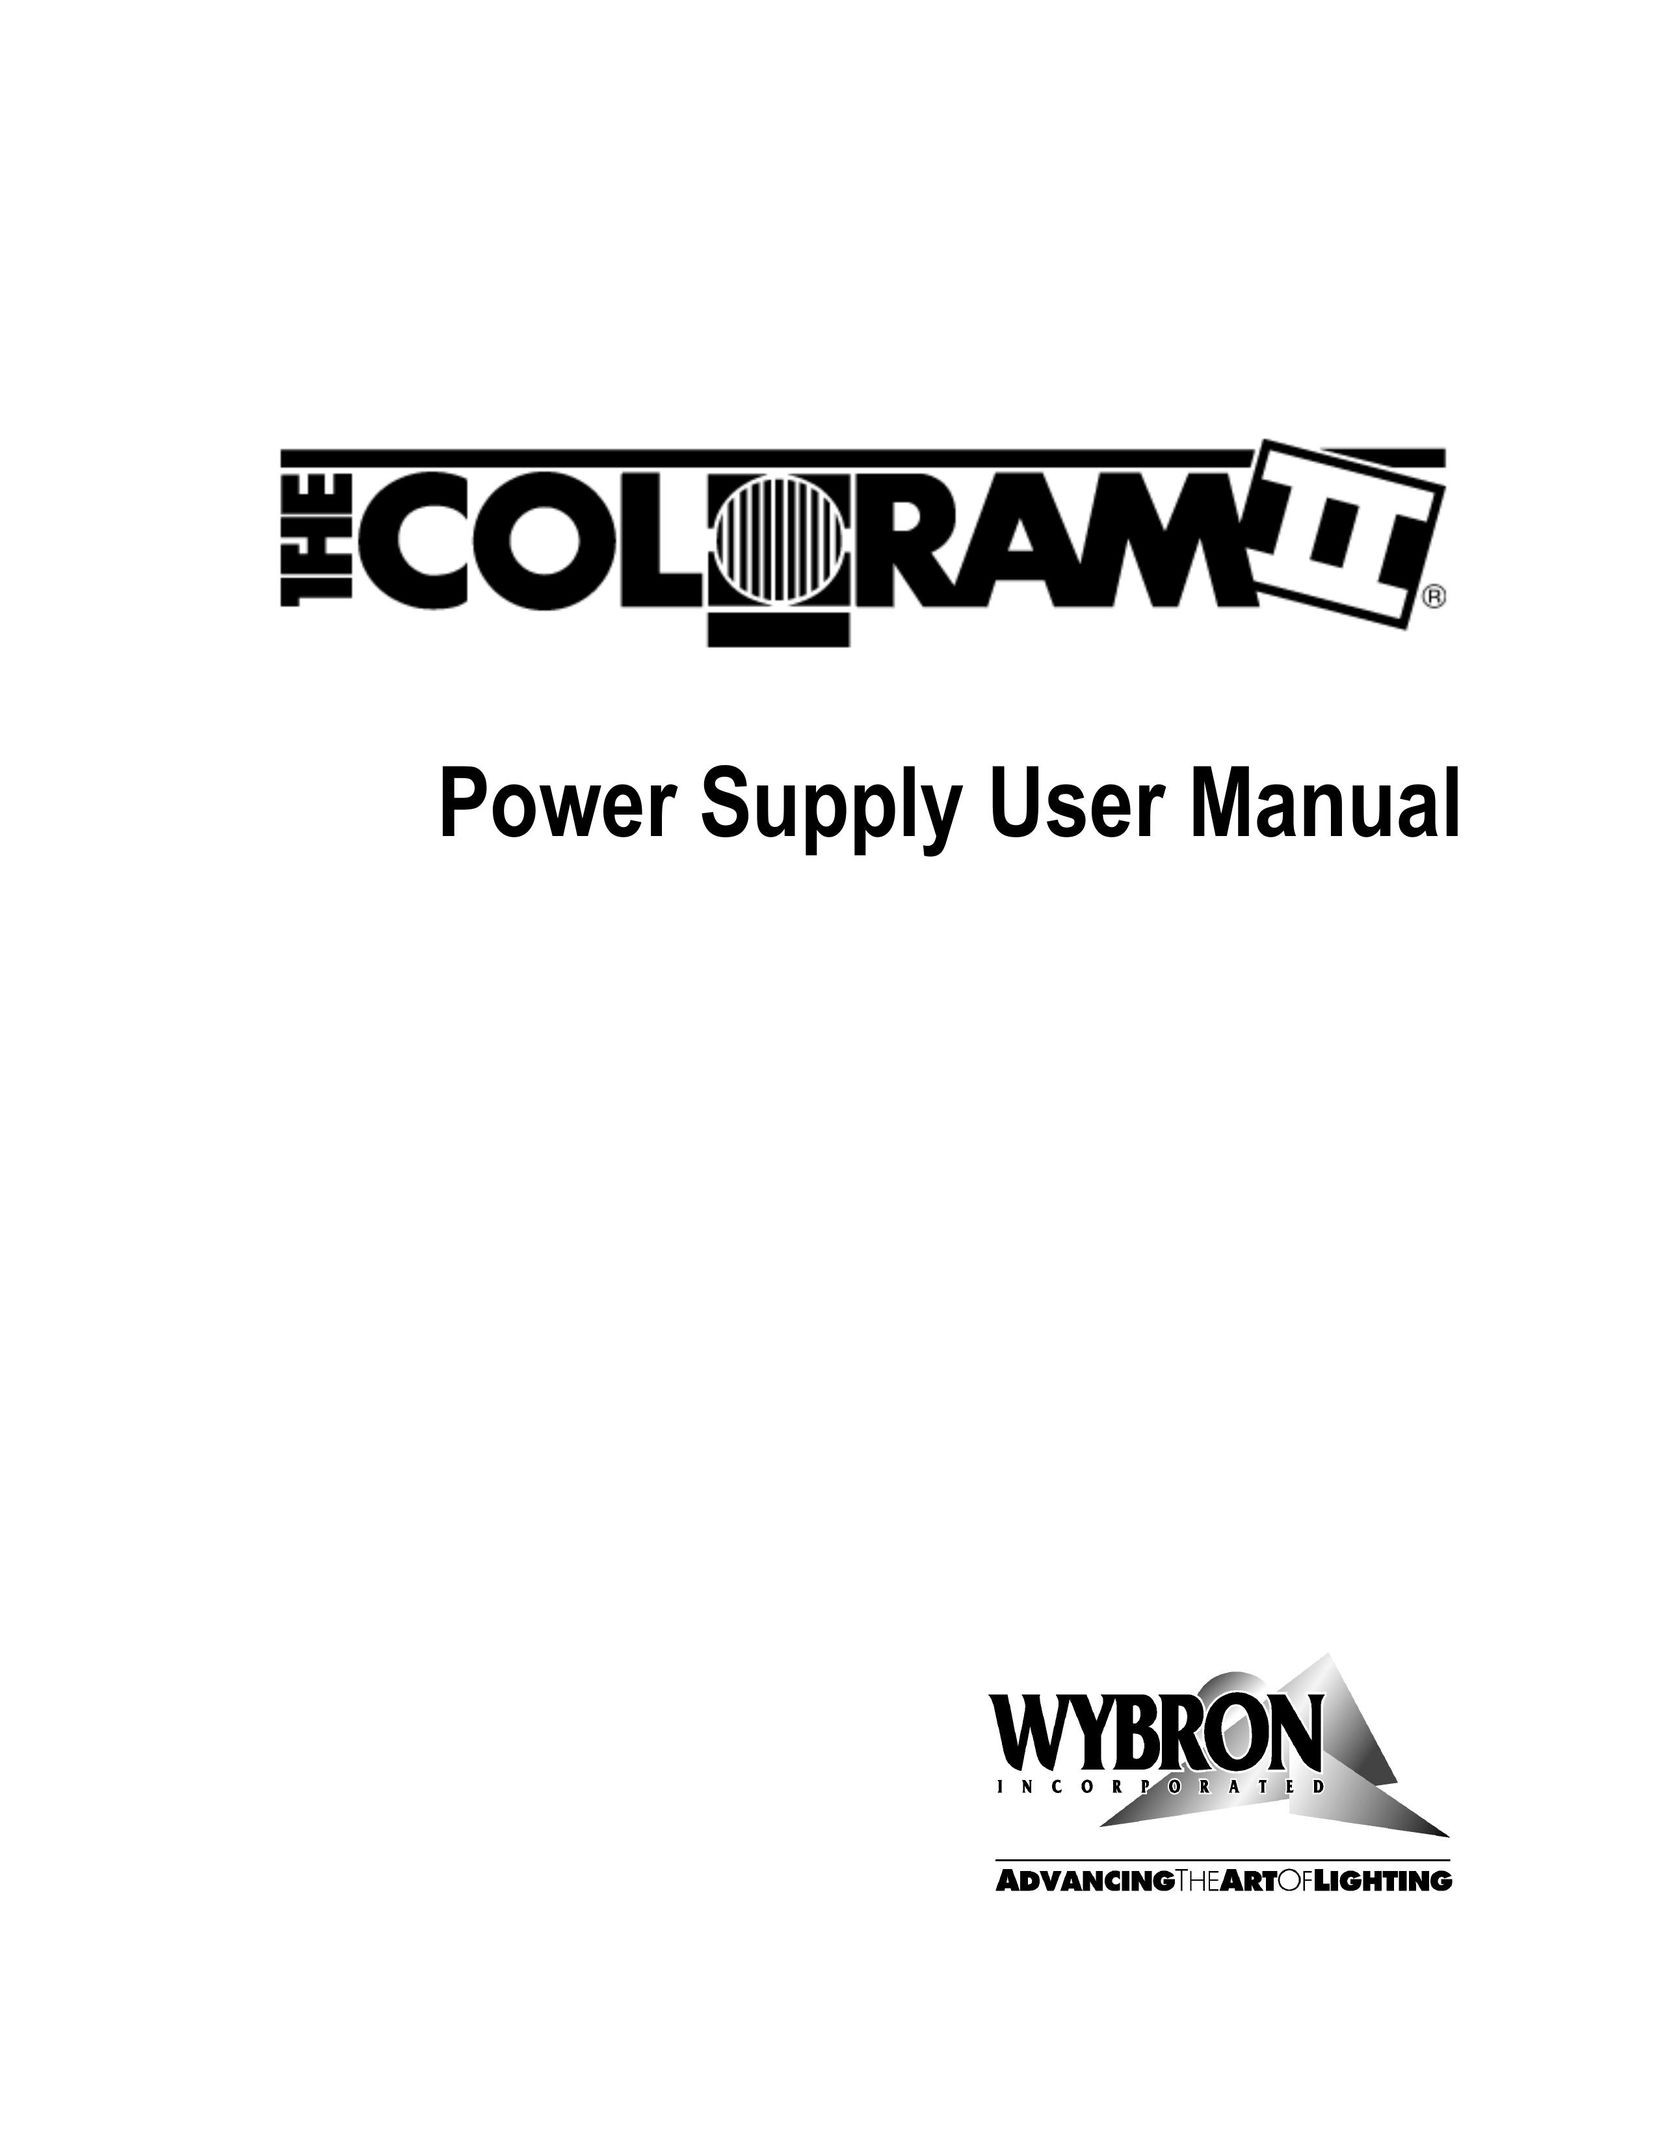 Select Products II Power Supply User Manual